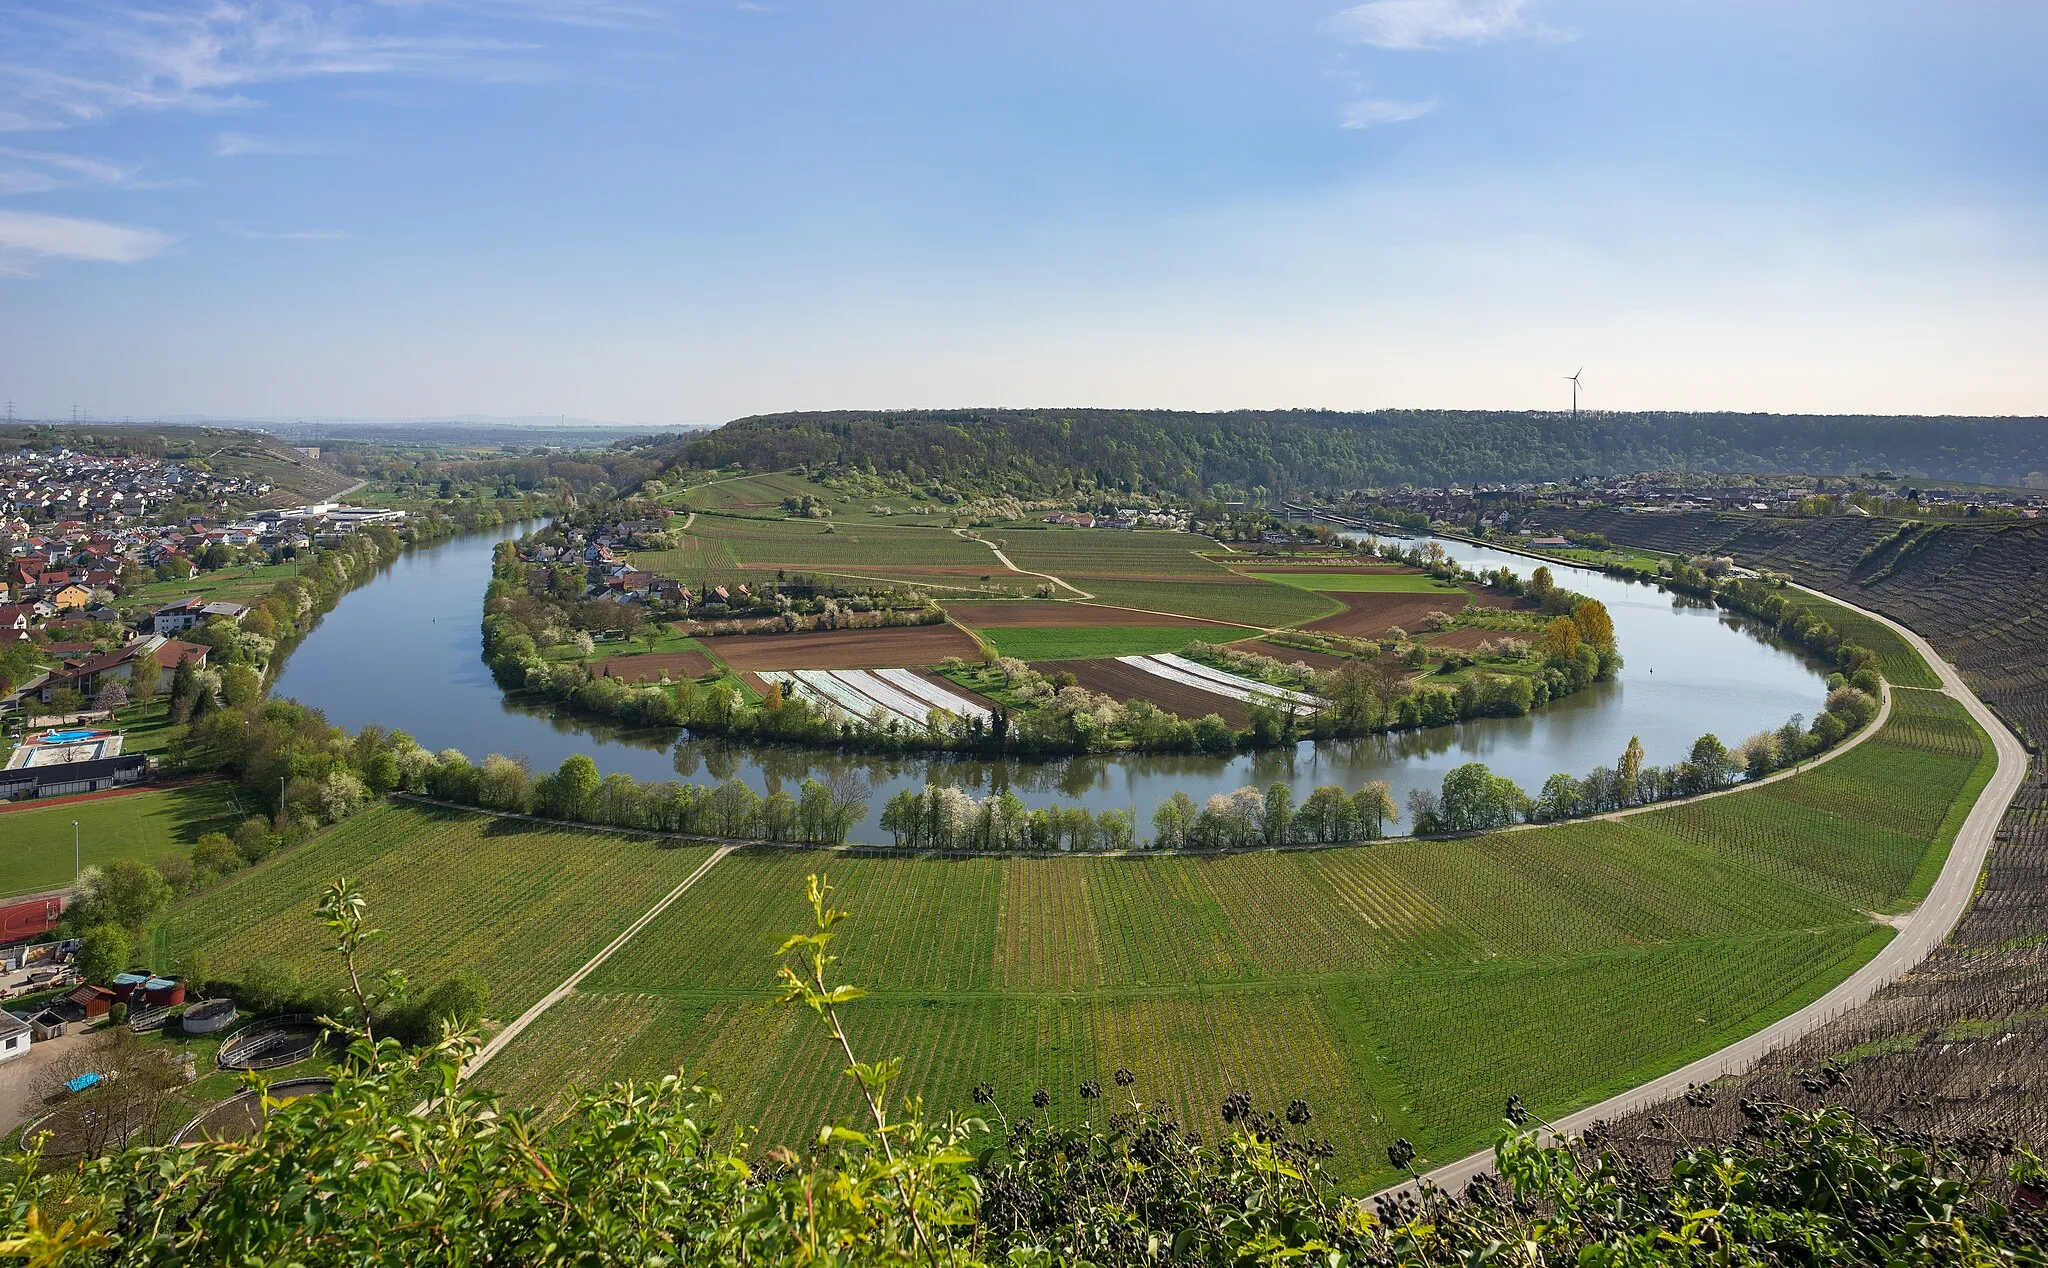 Photo showing: Mundelsheim, Germany: view from the so-called Käsbergkanzel on the Käsberg mountain over the loop of river Neckar between Mundelsheim (left) and Hessigheim (right).  Many areas visible in the photo belong to various proteced landscape areas.